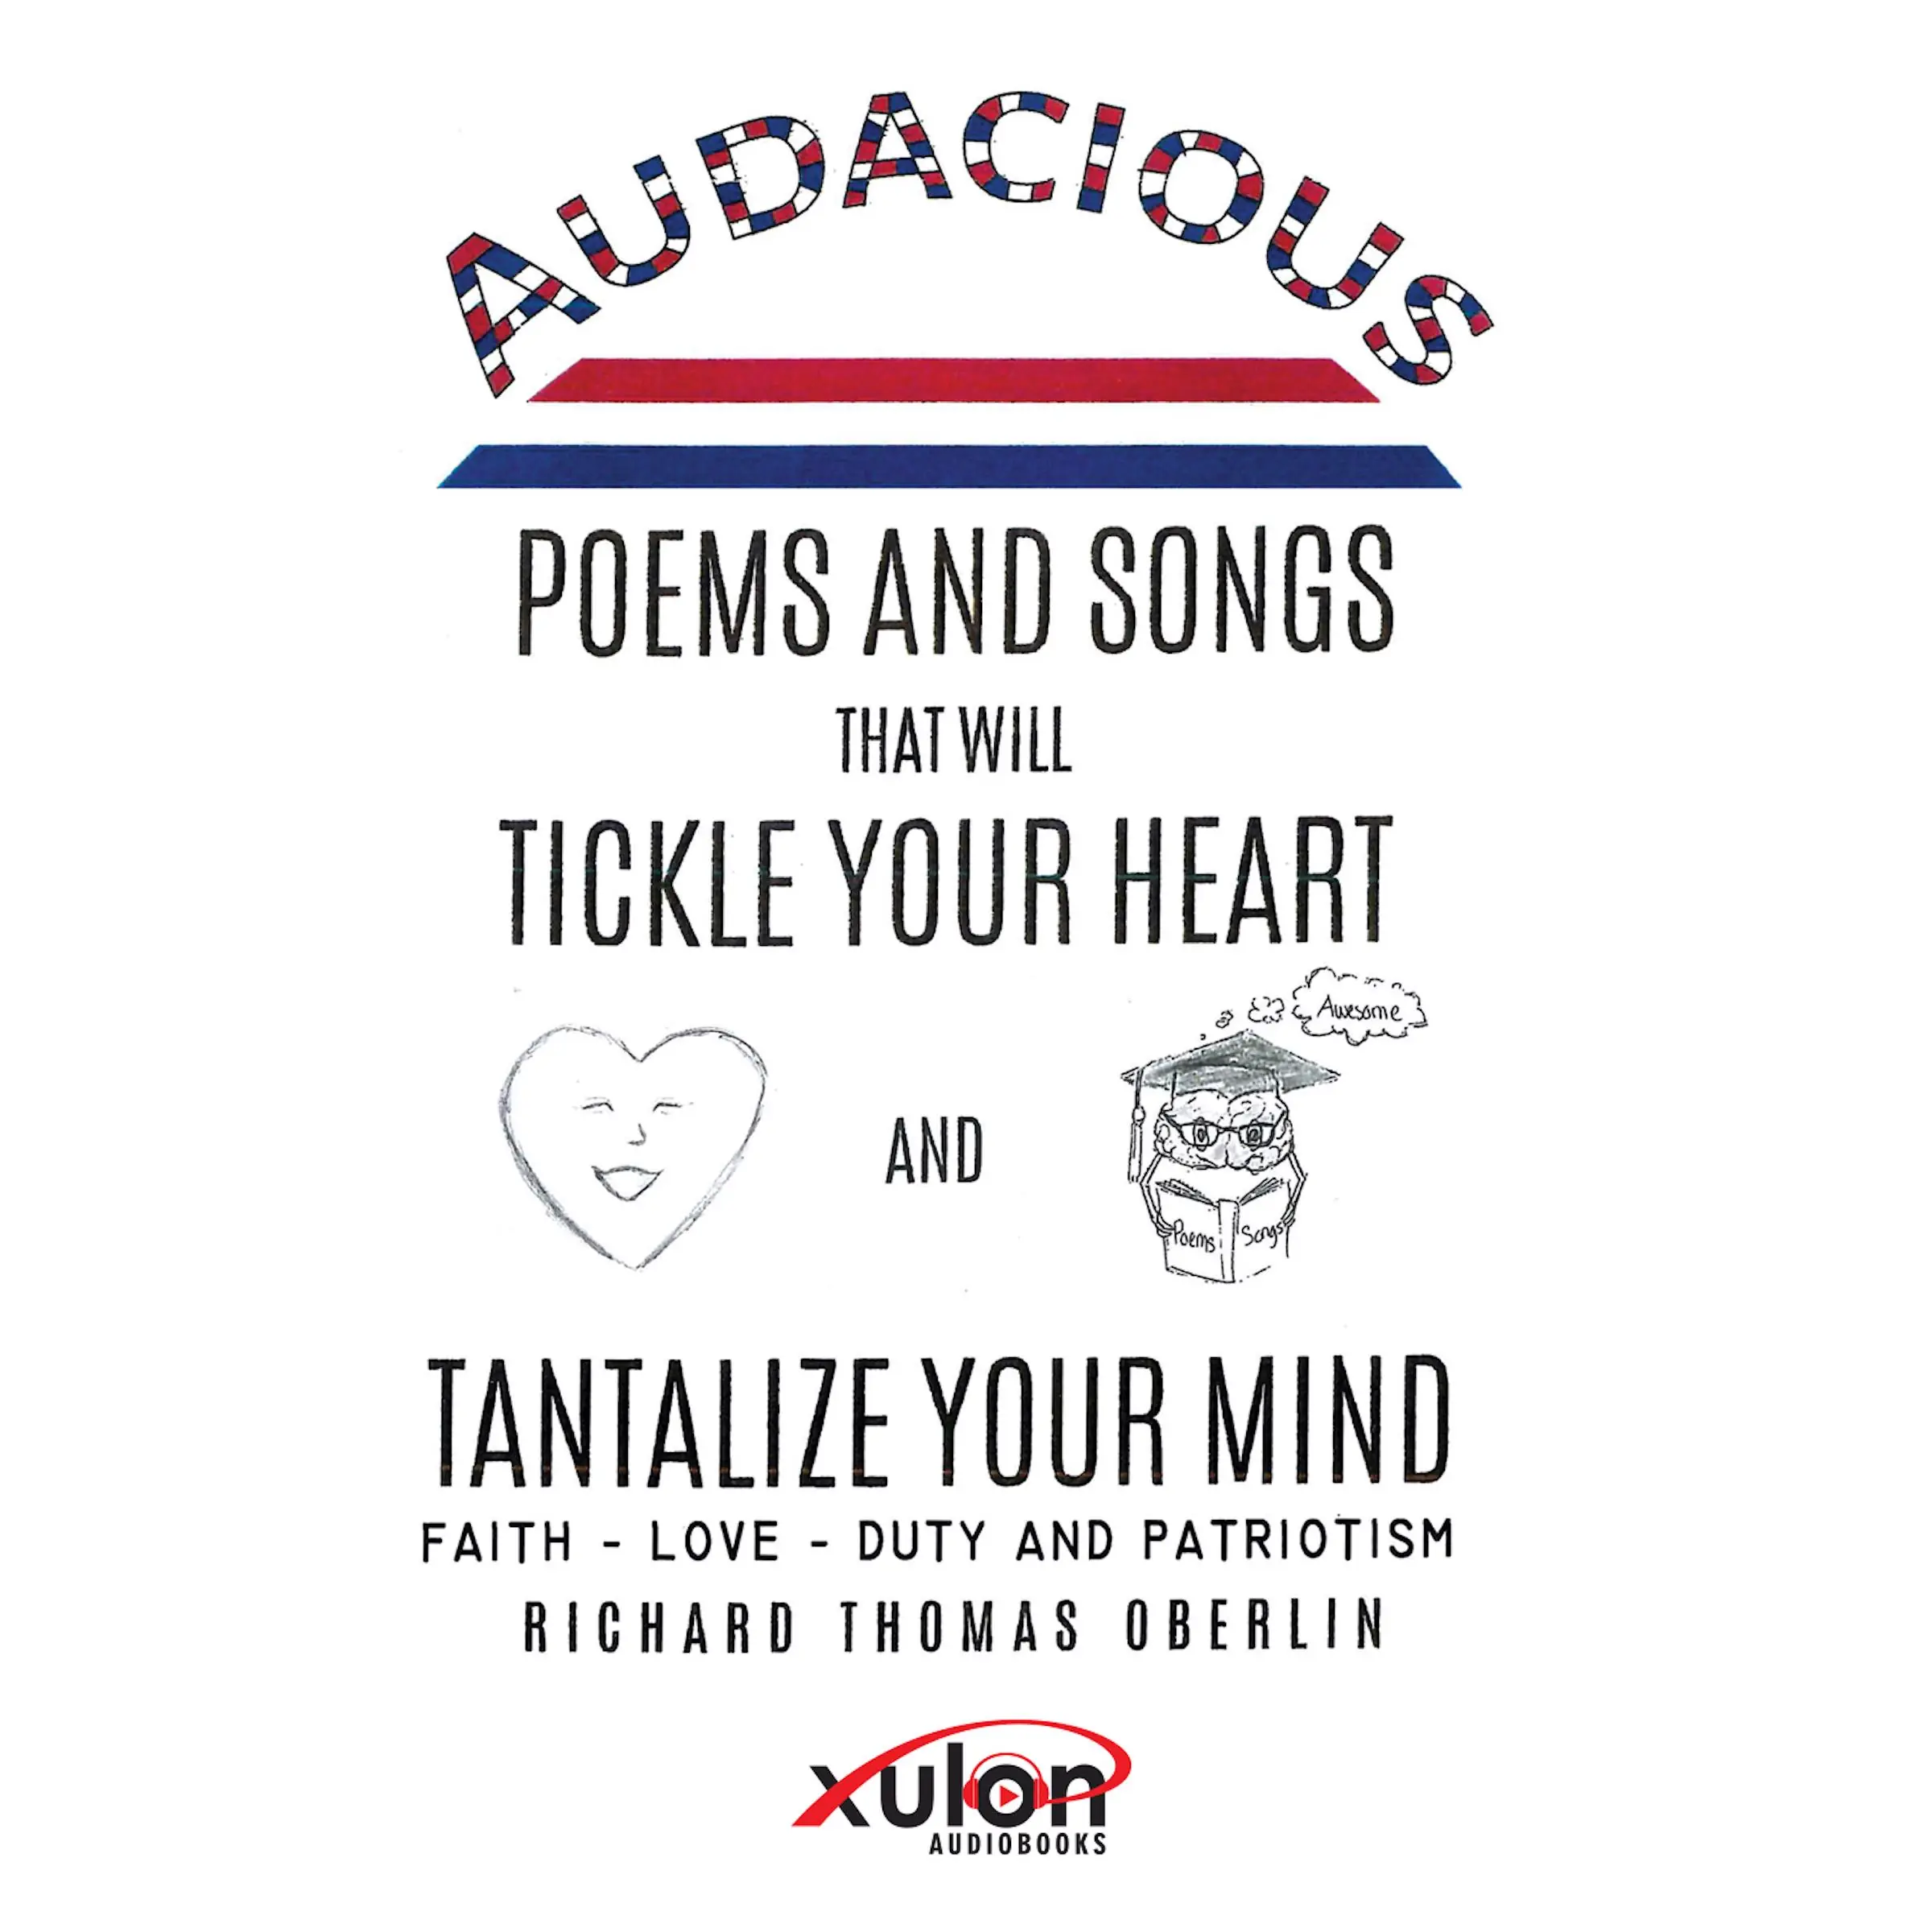 Audacious Poems and Songs That Will Tickle Your Heart And Tantalize Your Mind: Faith - Love- Duty and Patriotism Audiobook by Richard Thomas Oberlin